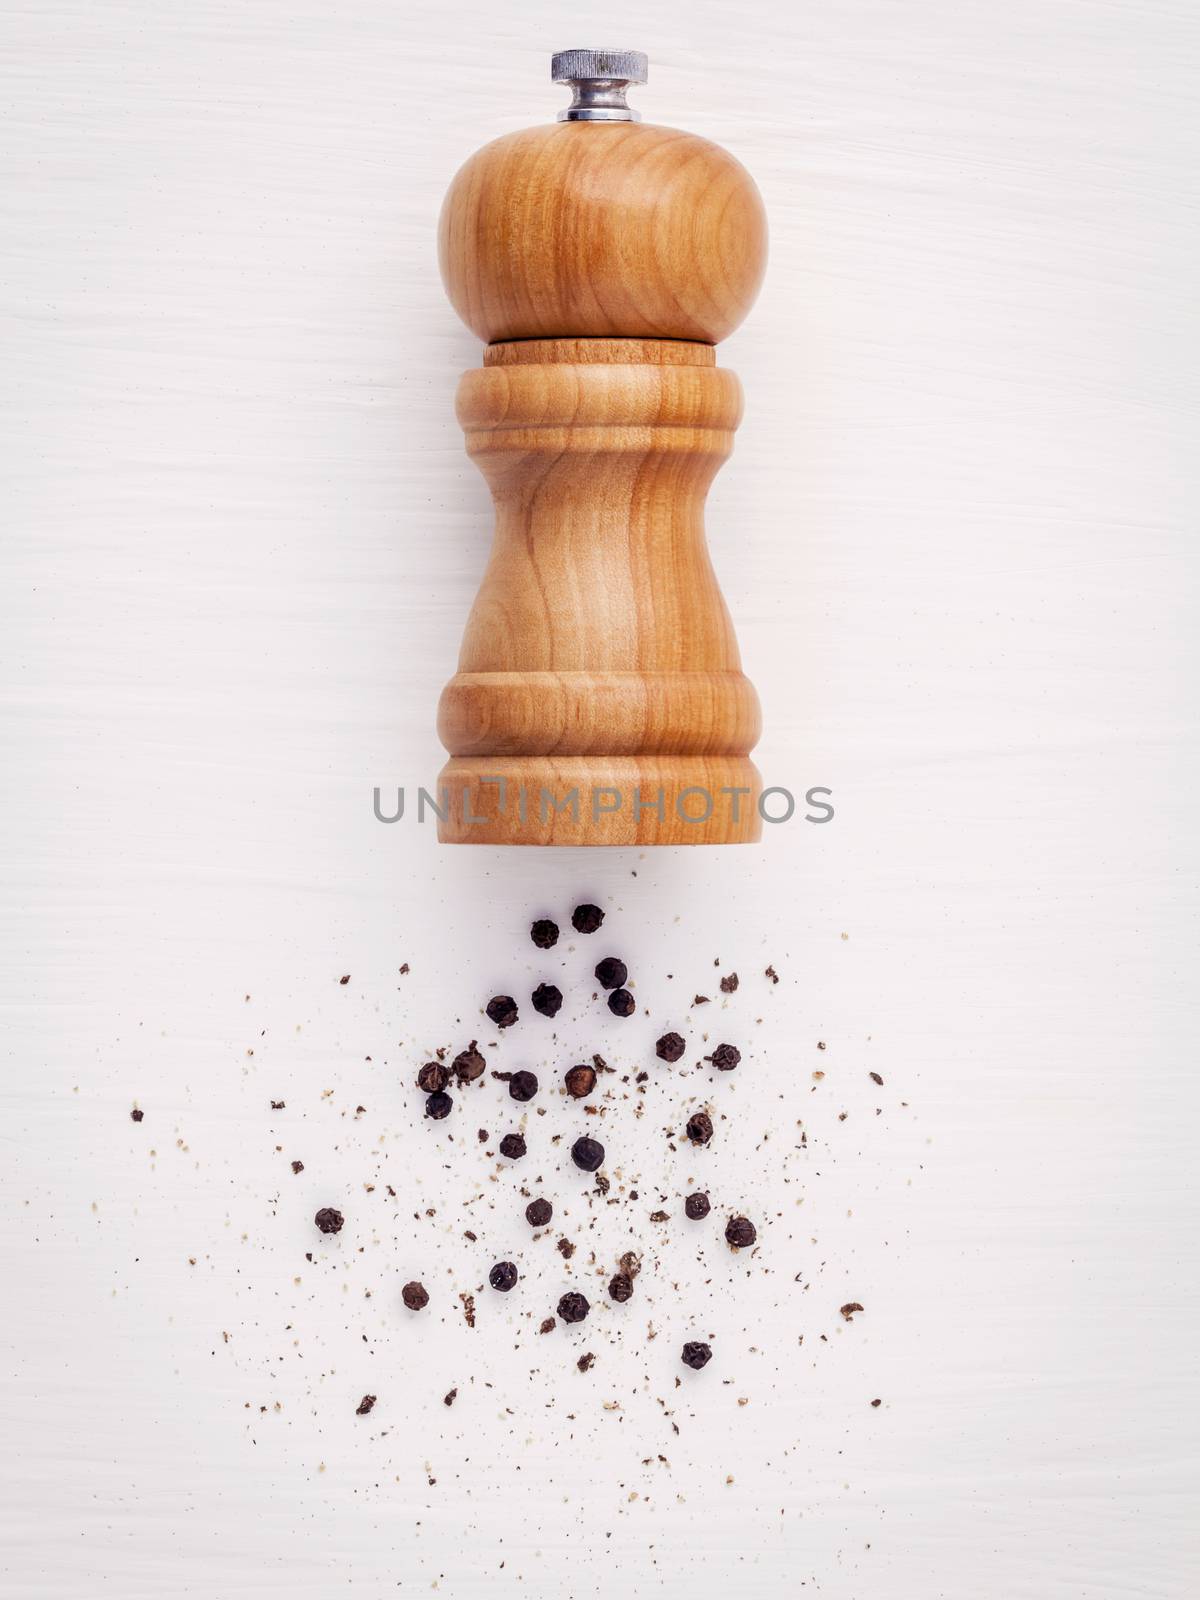 Close up of bottle black pepper mill on white wood table. Seasoning and spices ingredients concept . Flat lay of bottle black pepper mill for culinary seasoning .